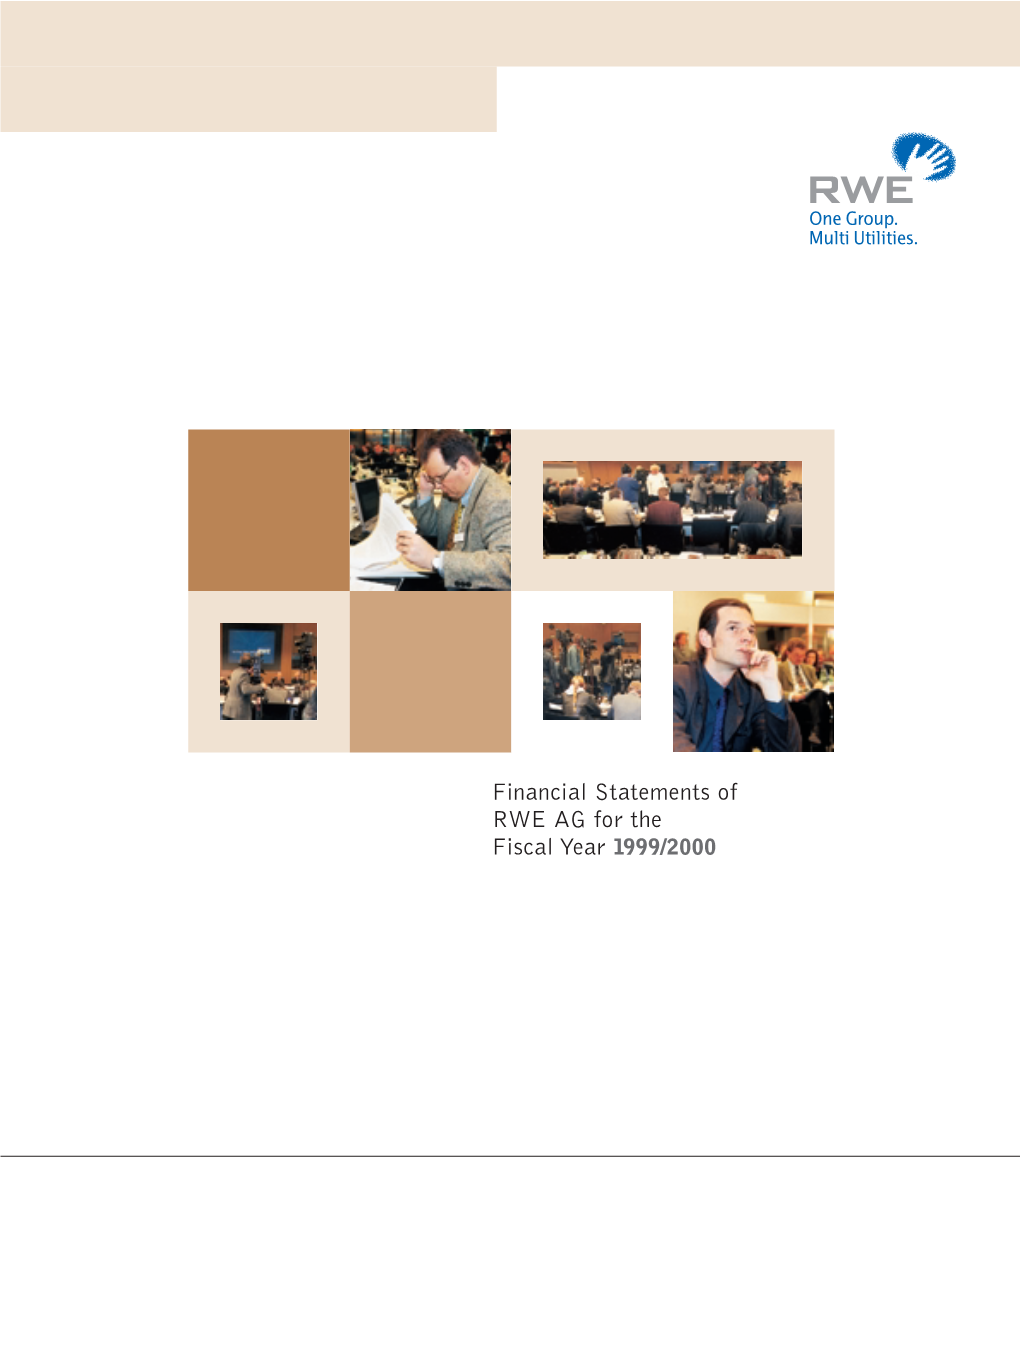 Financial Statements of RWE AG for the Fiscal Year 1999/2000 Financial Statements of RWE AG